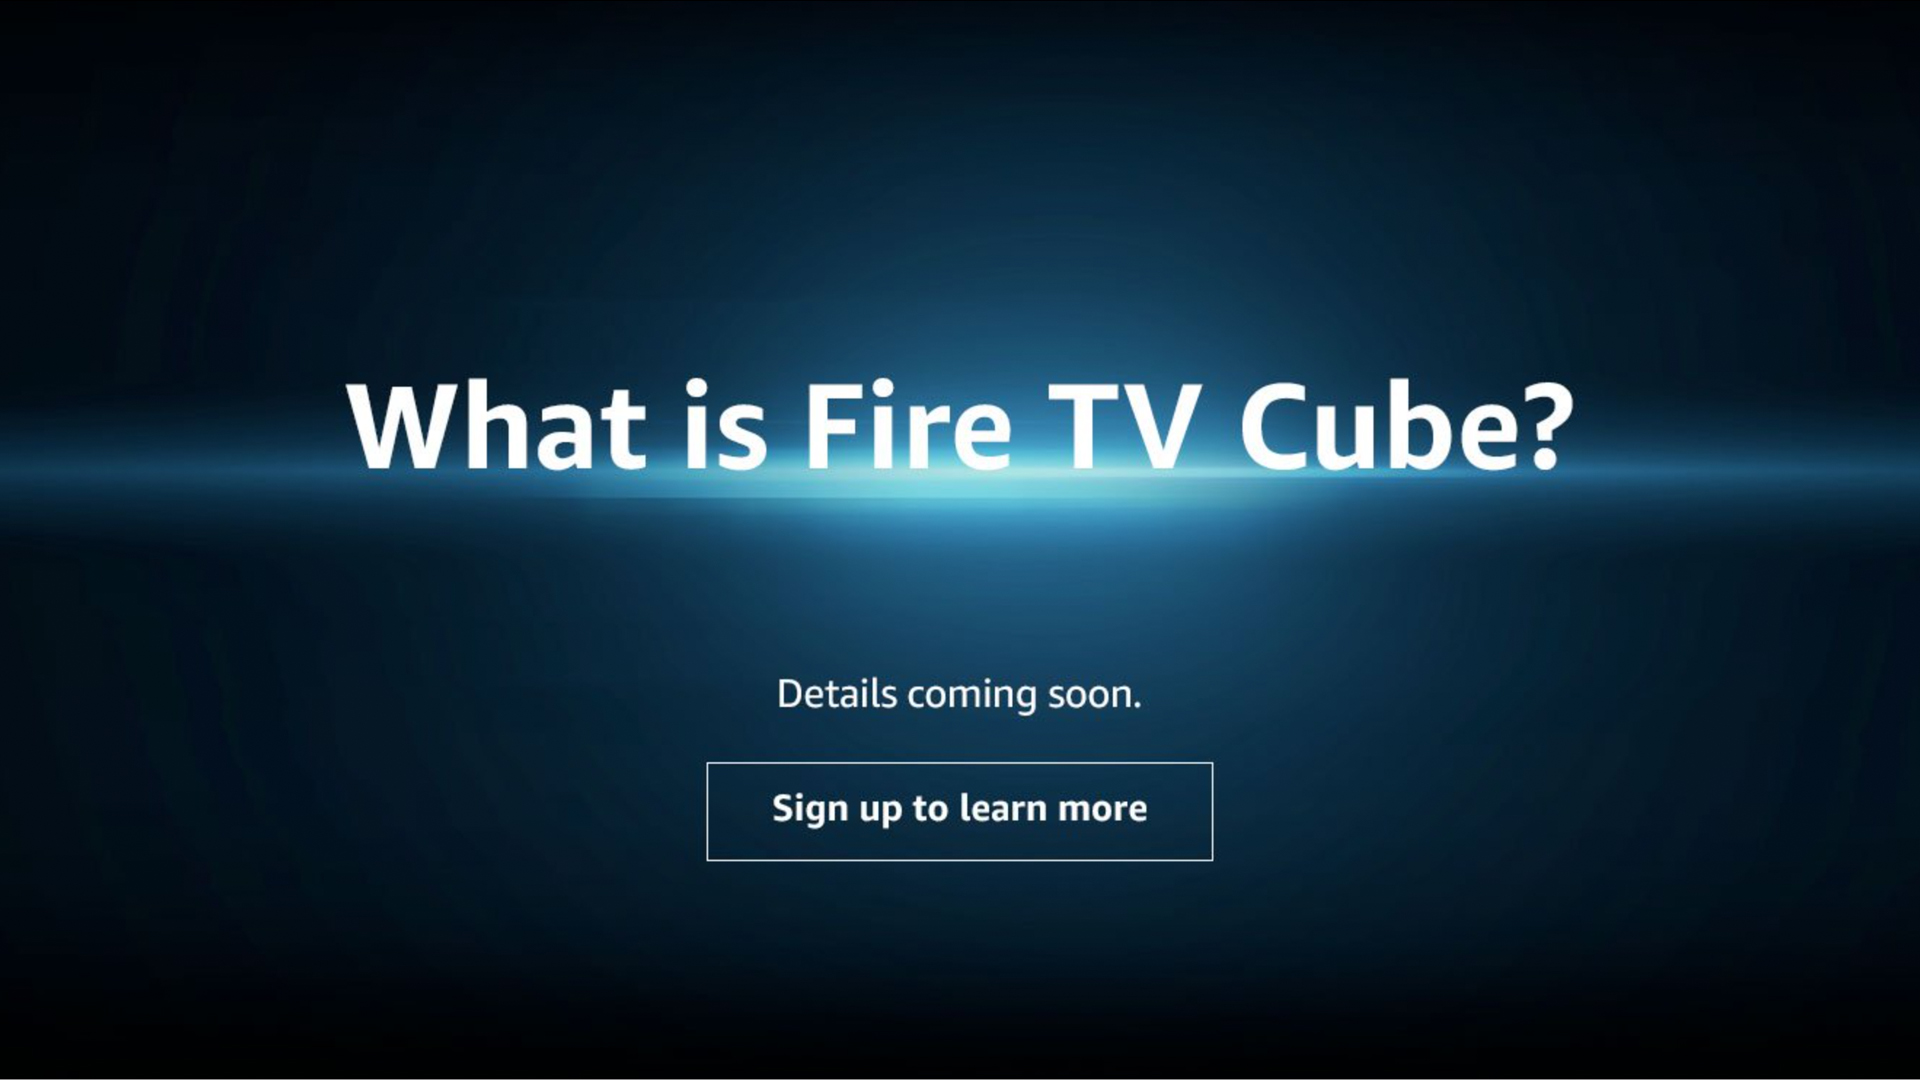 Amazon Teases Yet To Be Released Fire TV Cube